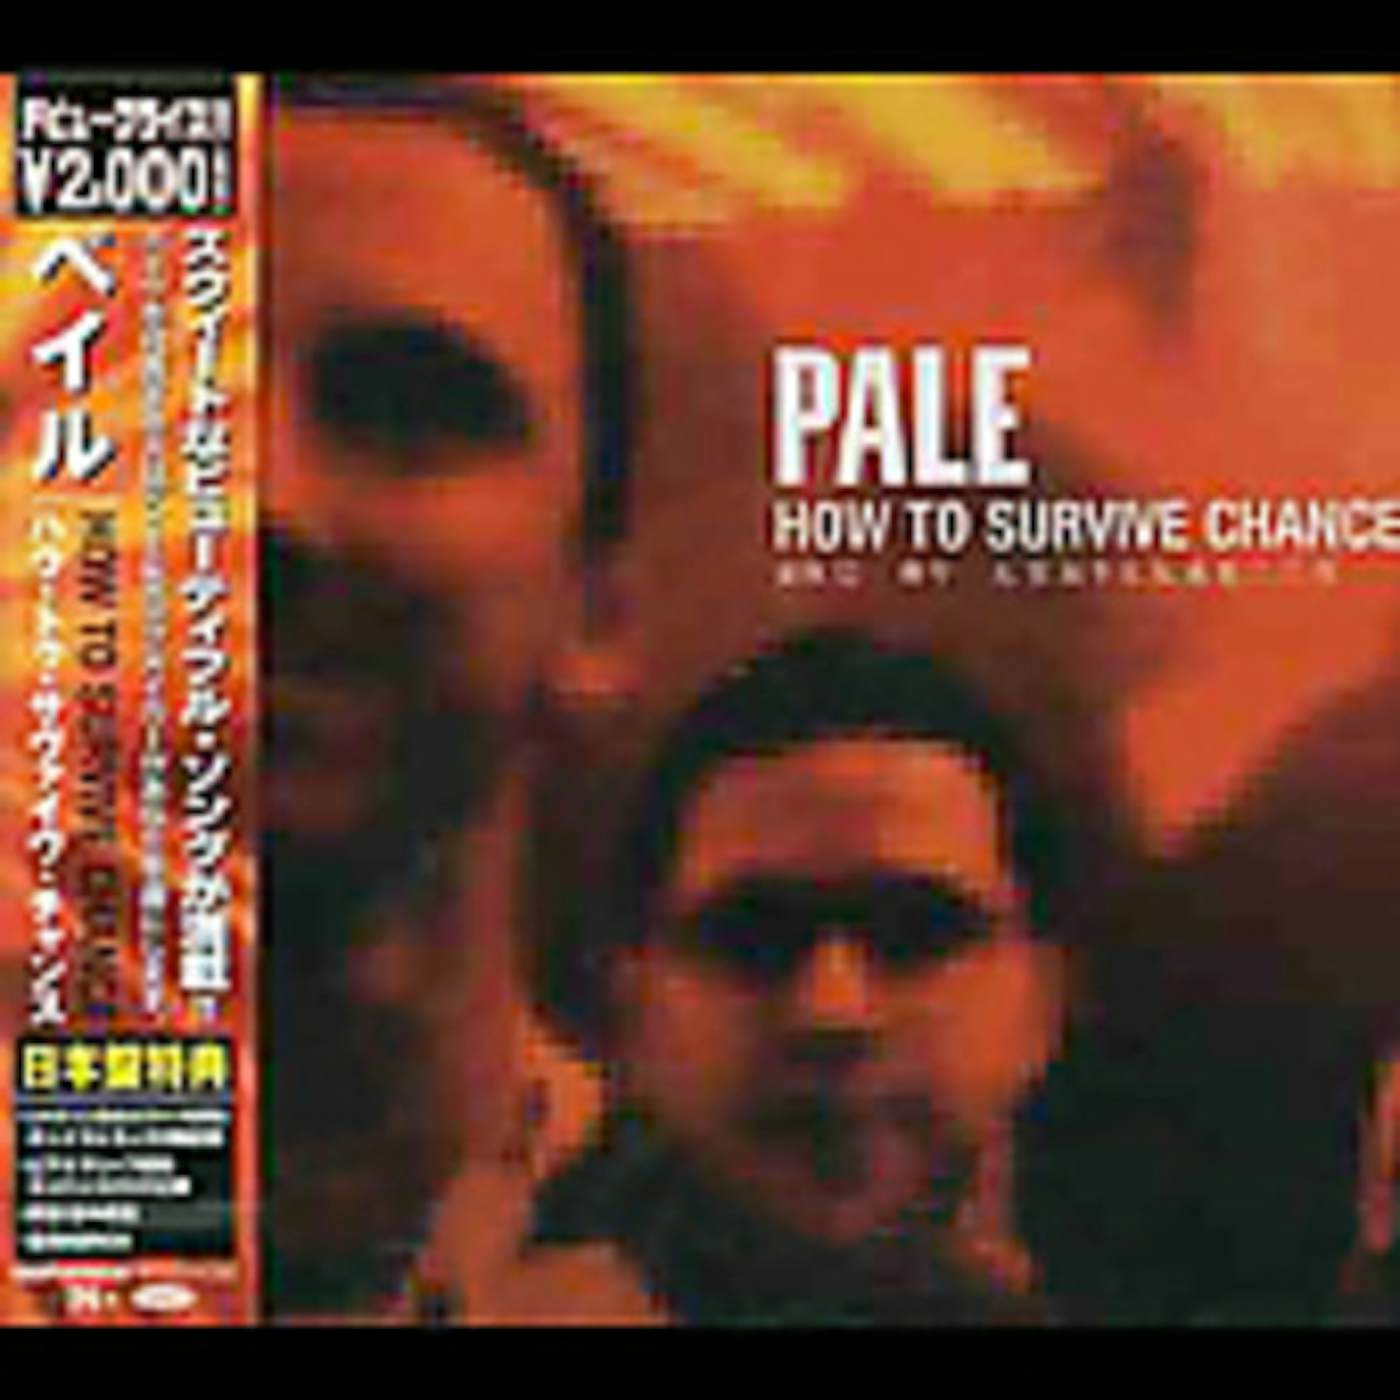 Pale HOW TO SURVIVE CHANCE CD